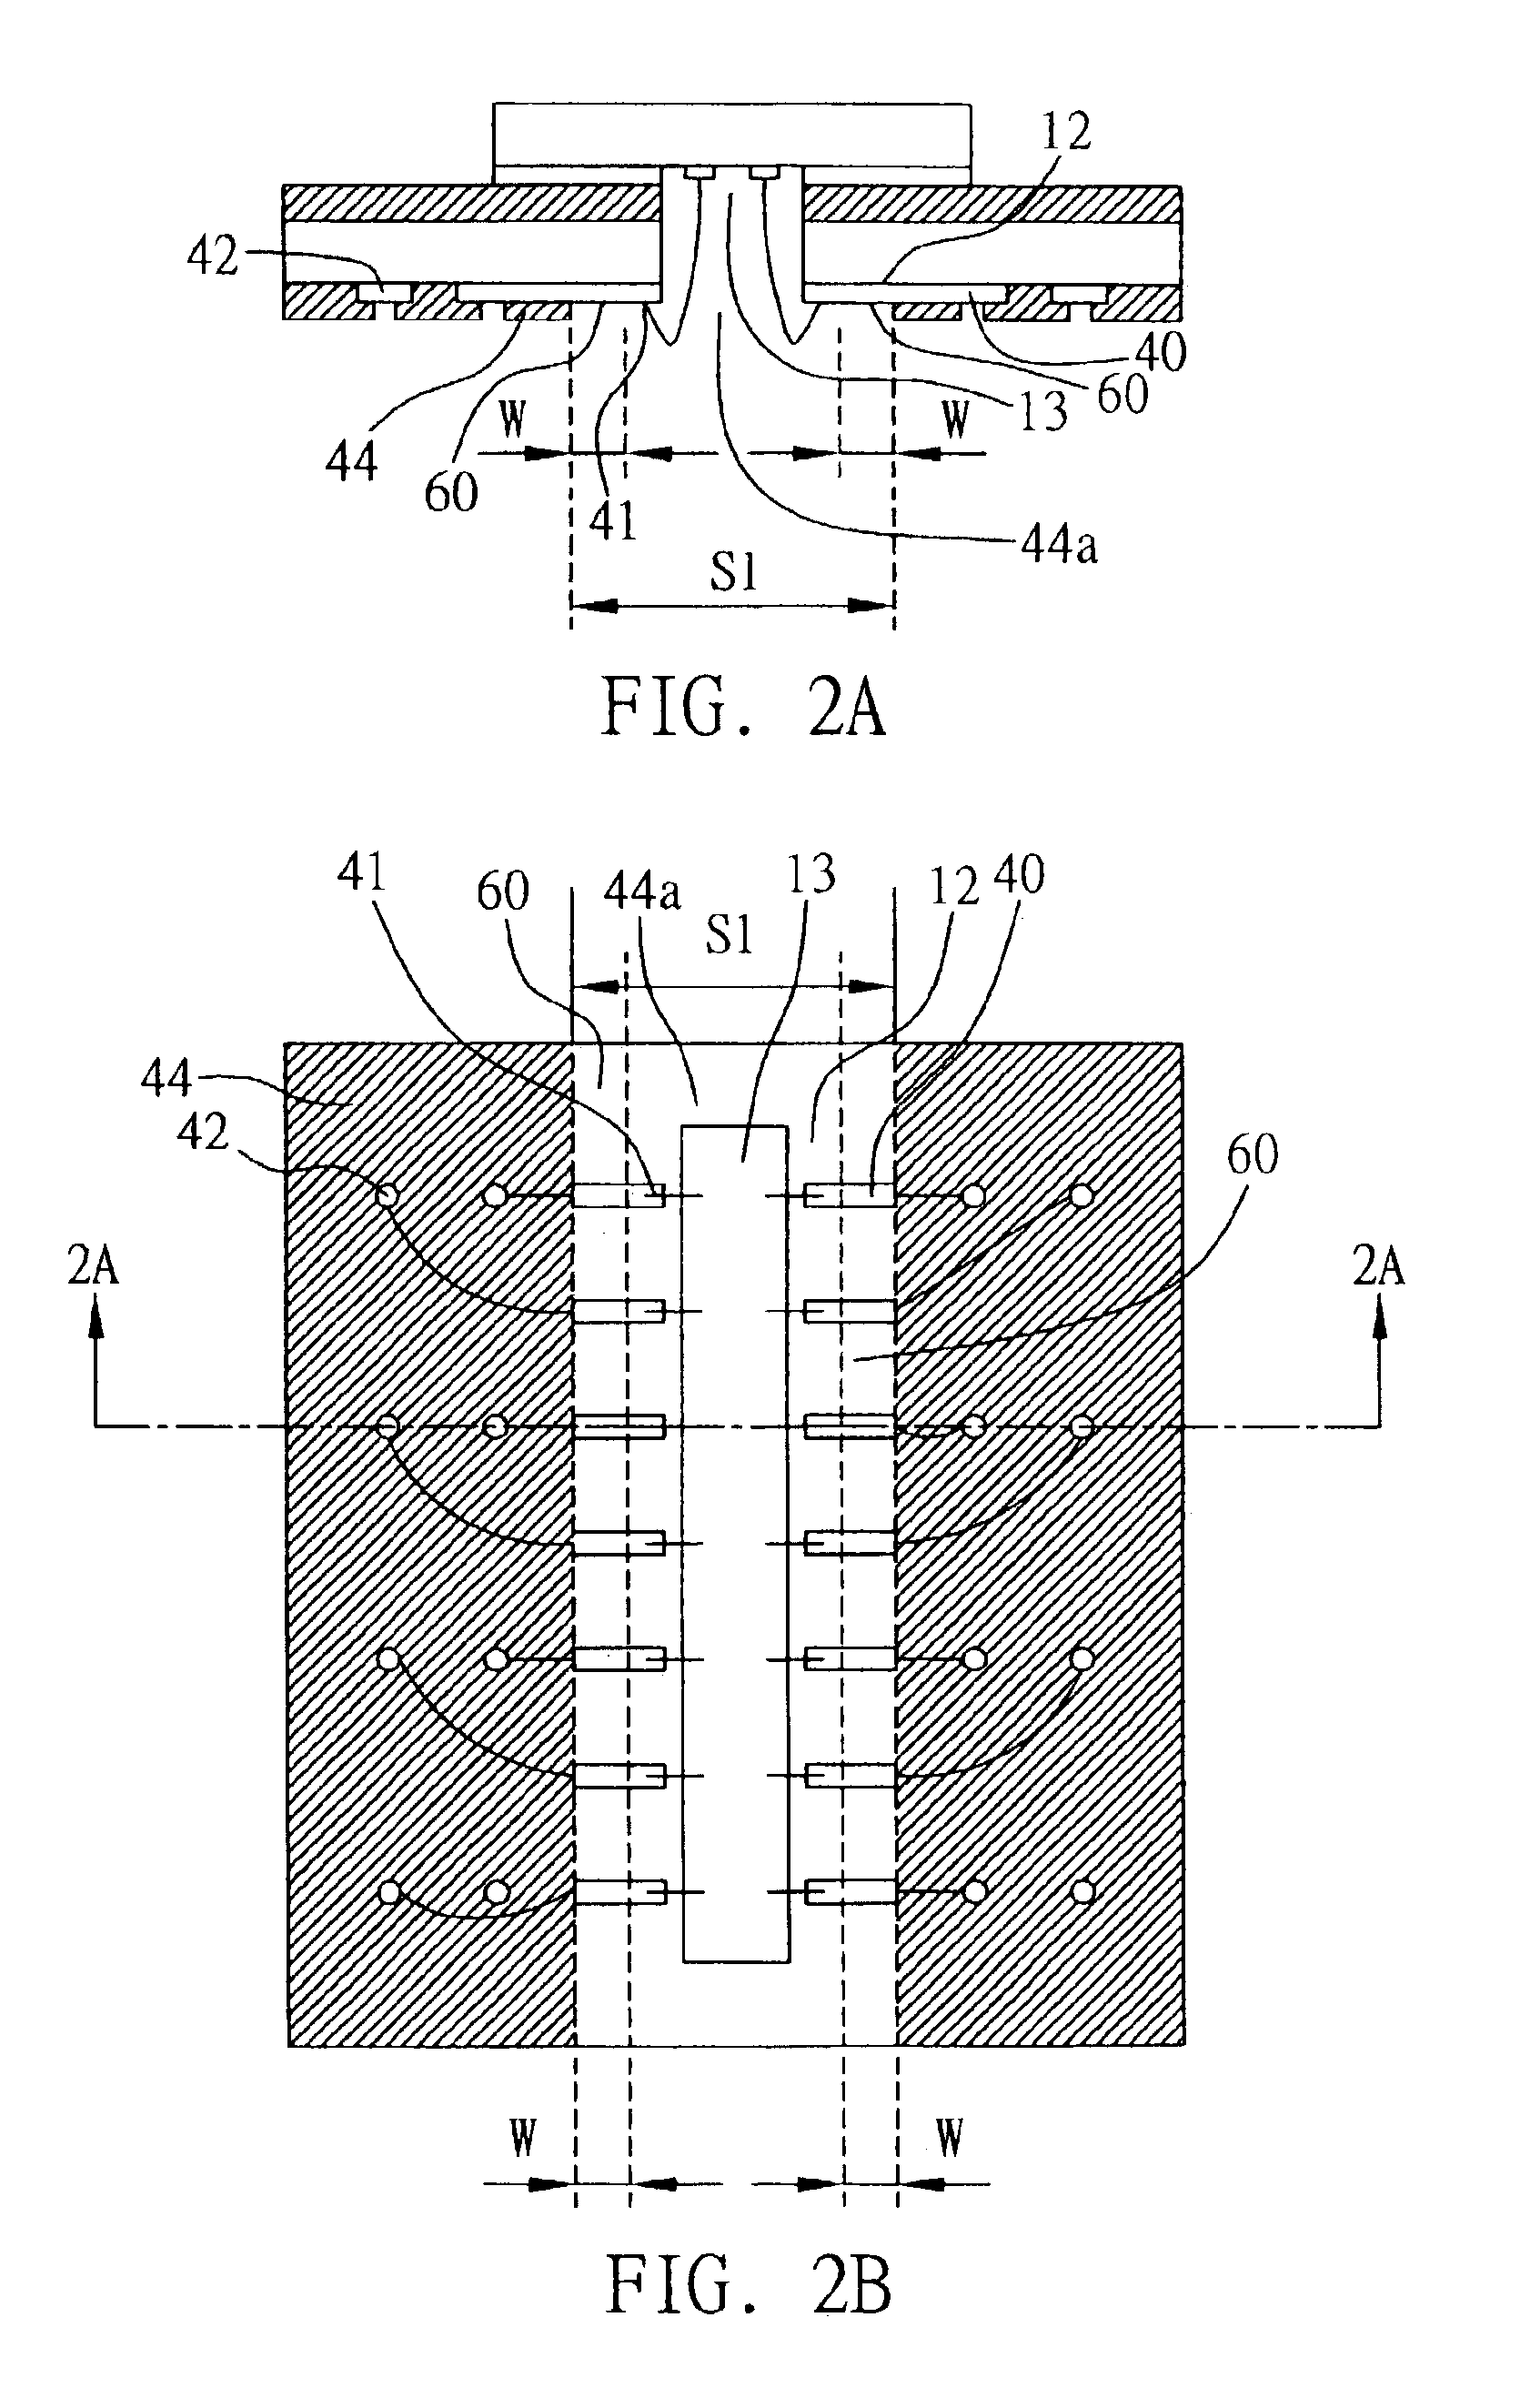 Flash-preventing window ball grid array semiconductor package, method for fabricating the same, and chip carrier used in the semiconductor package